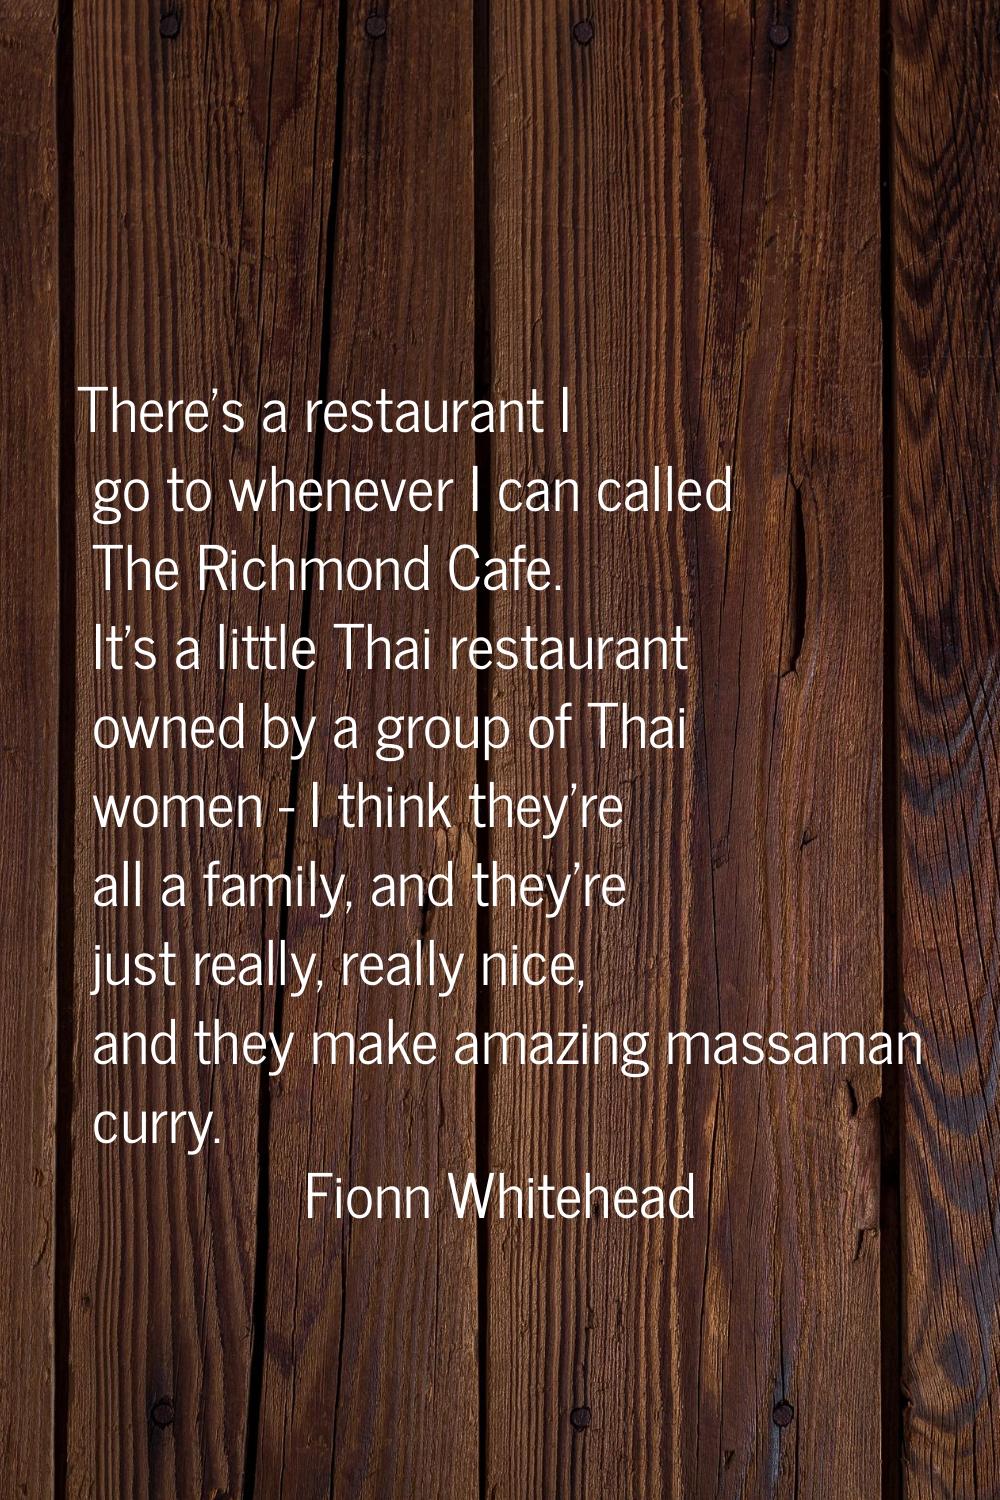 There's a restaurant I go to whenever I can called The Richmond Cafe. It's a little Thai restaurant